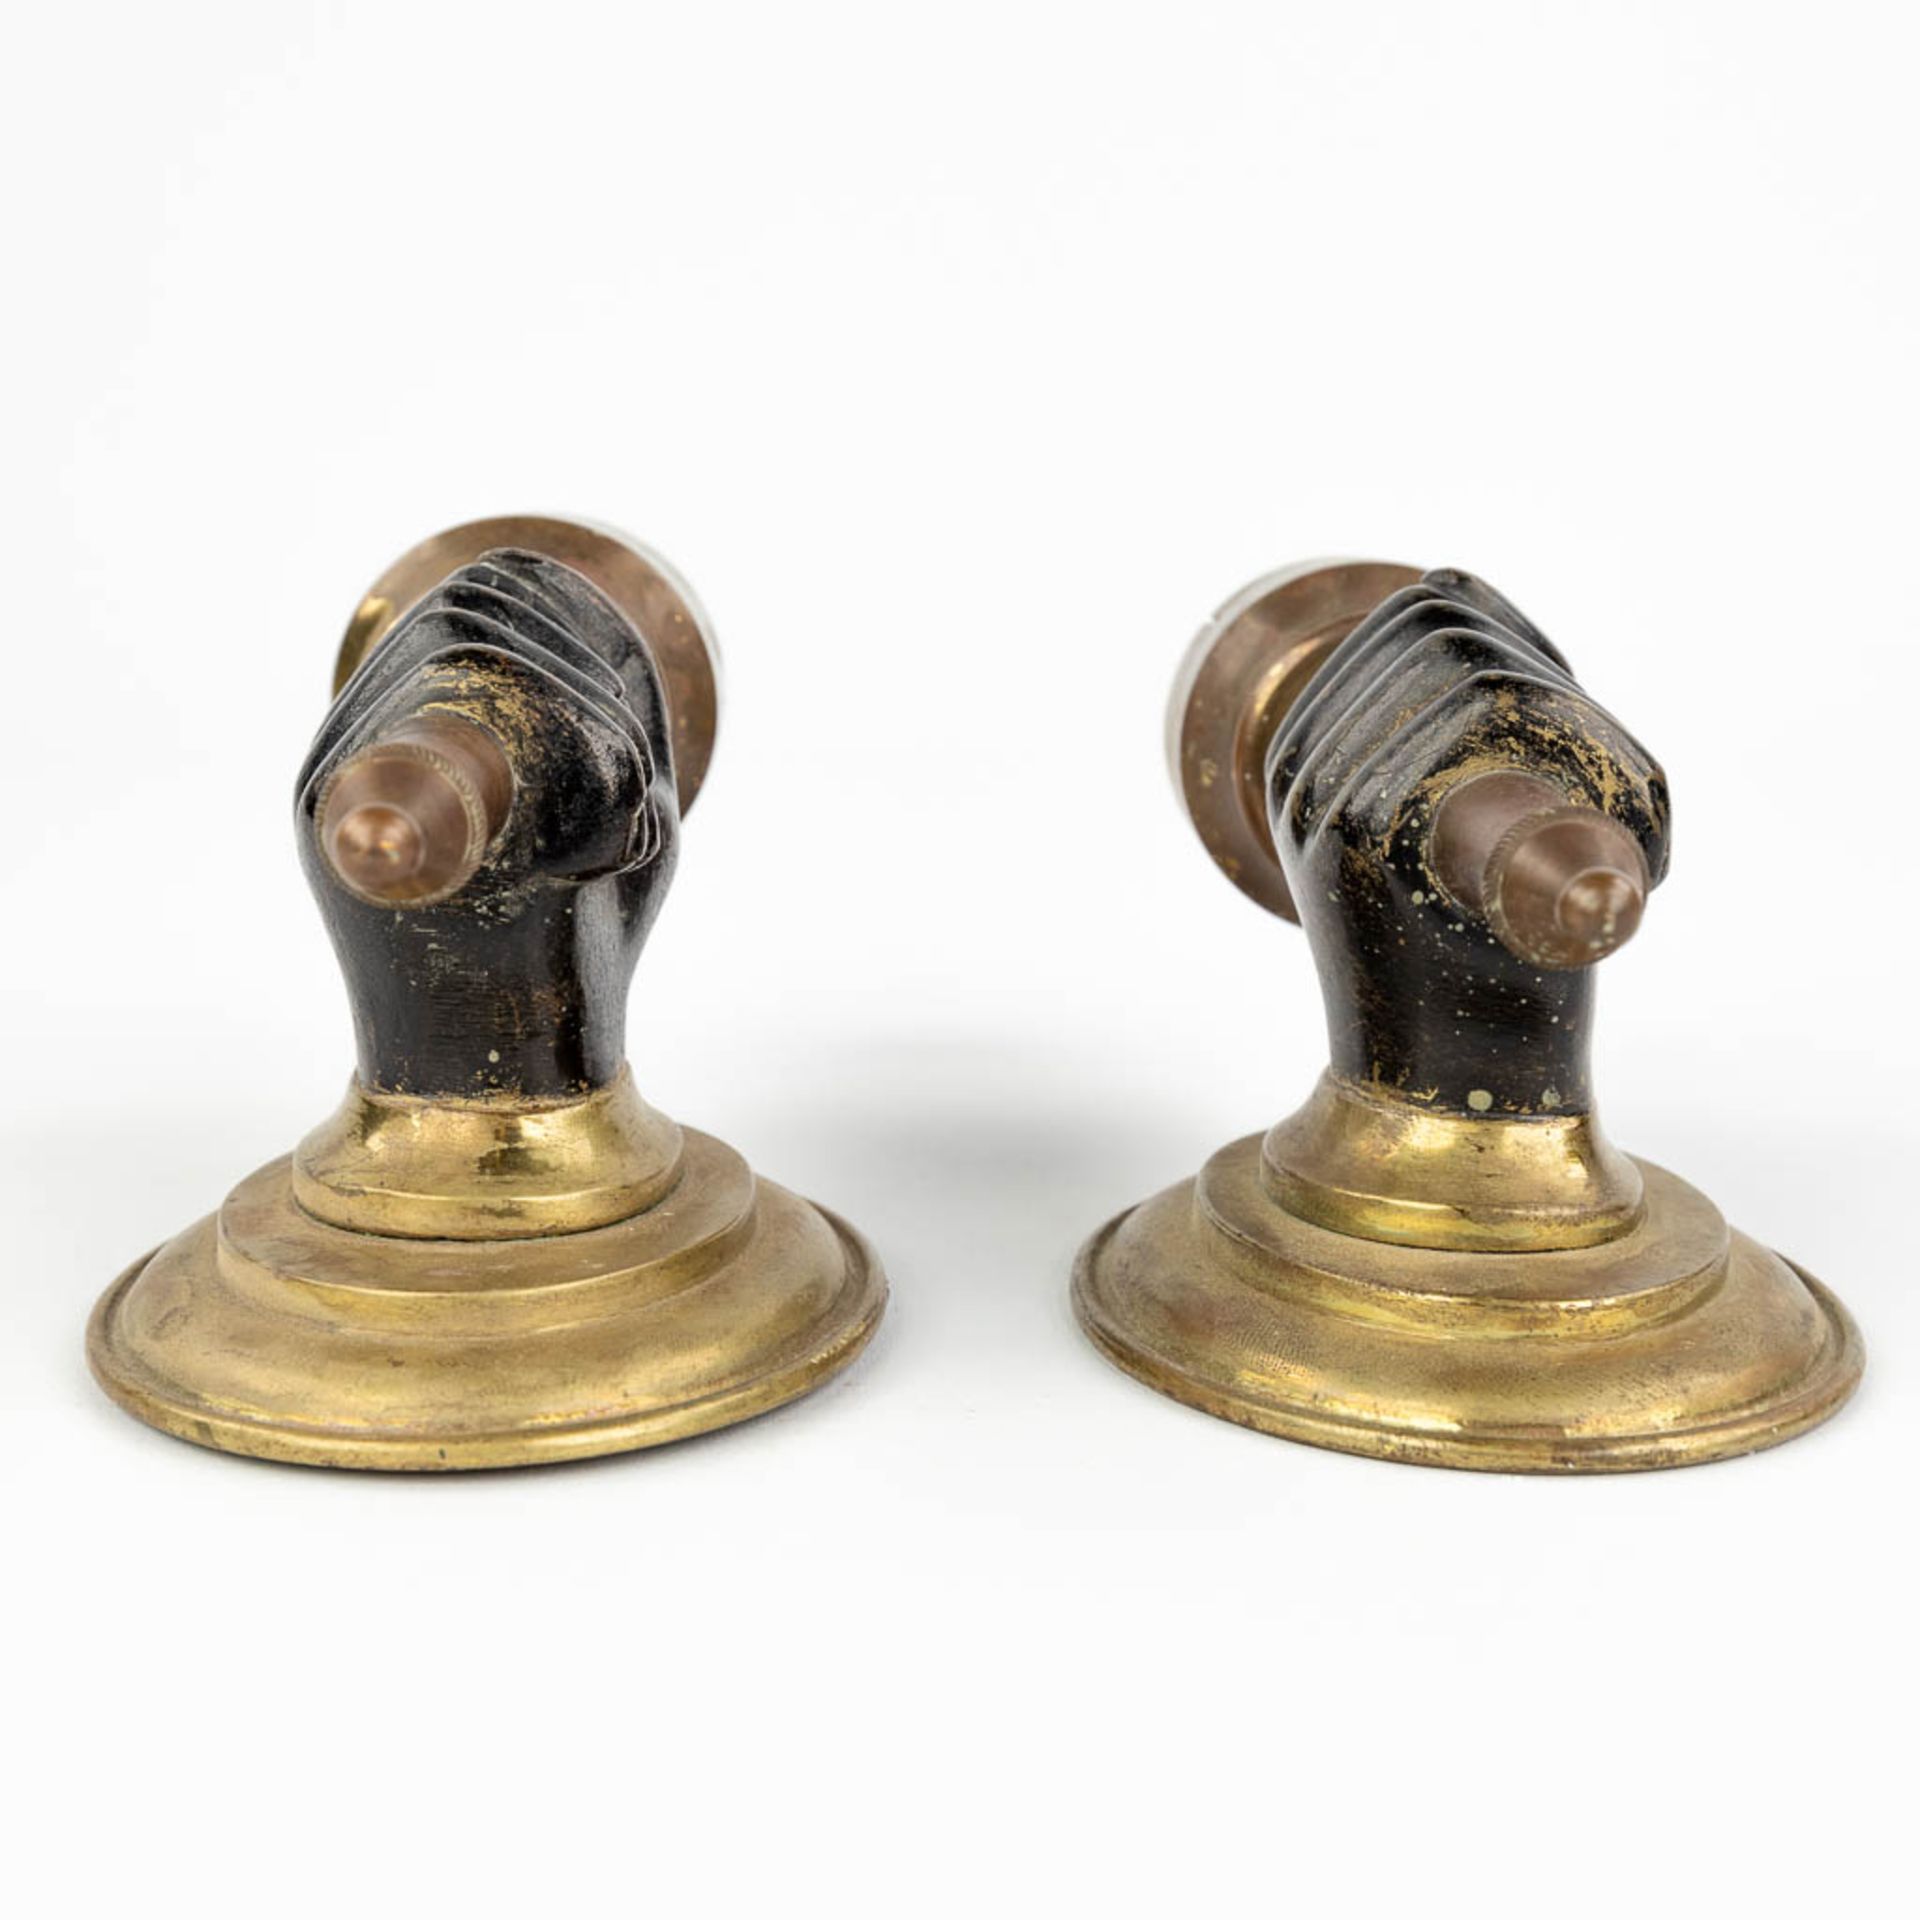 A pair of wall lamps in the shape of a hand with torch, circa 1900. (L:8 x W:7,5 x H:15 cm) - Image 7 of 10